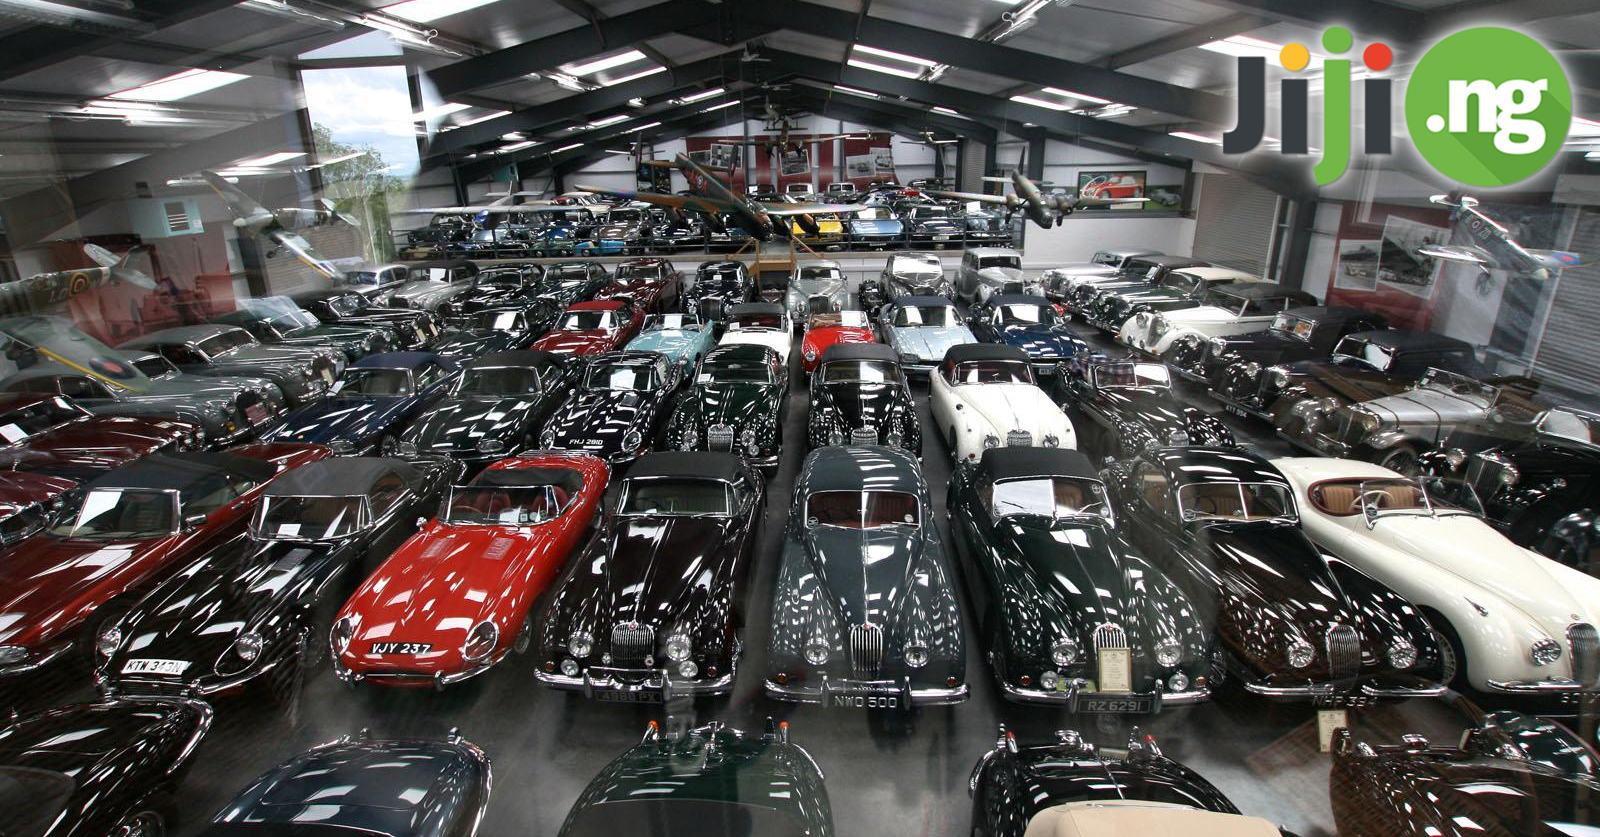 Sultan Of Brunei Cars The Biggest Collection In The World Jiji Blog